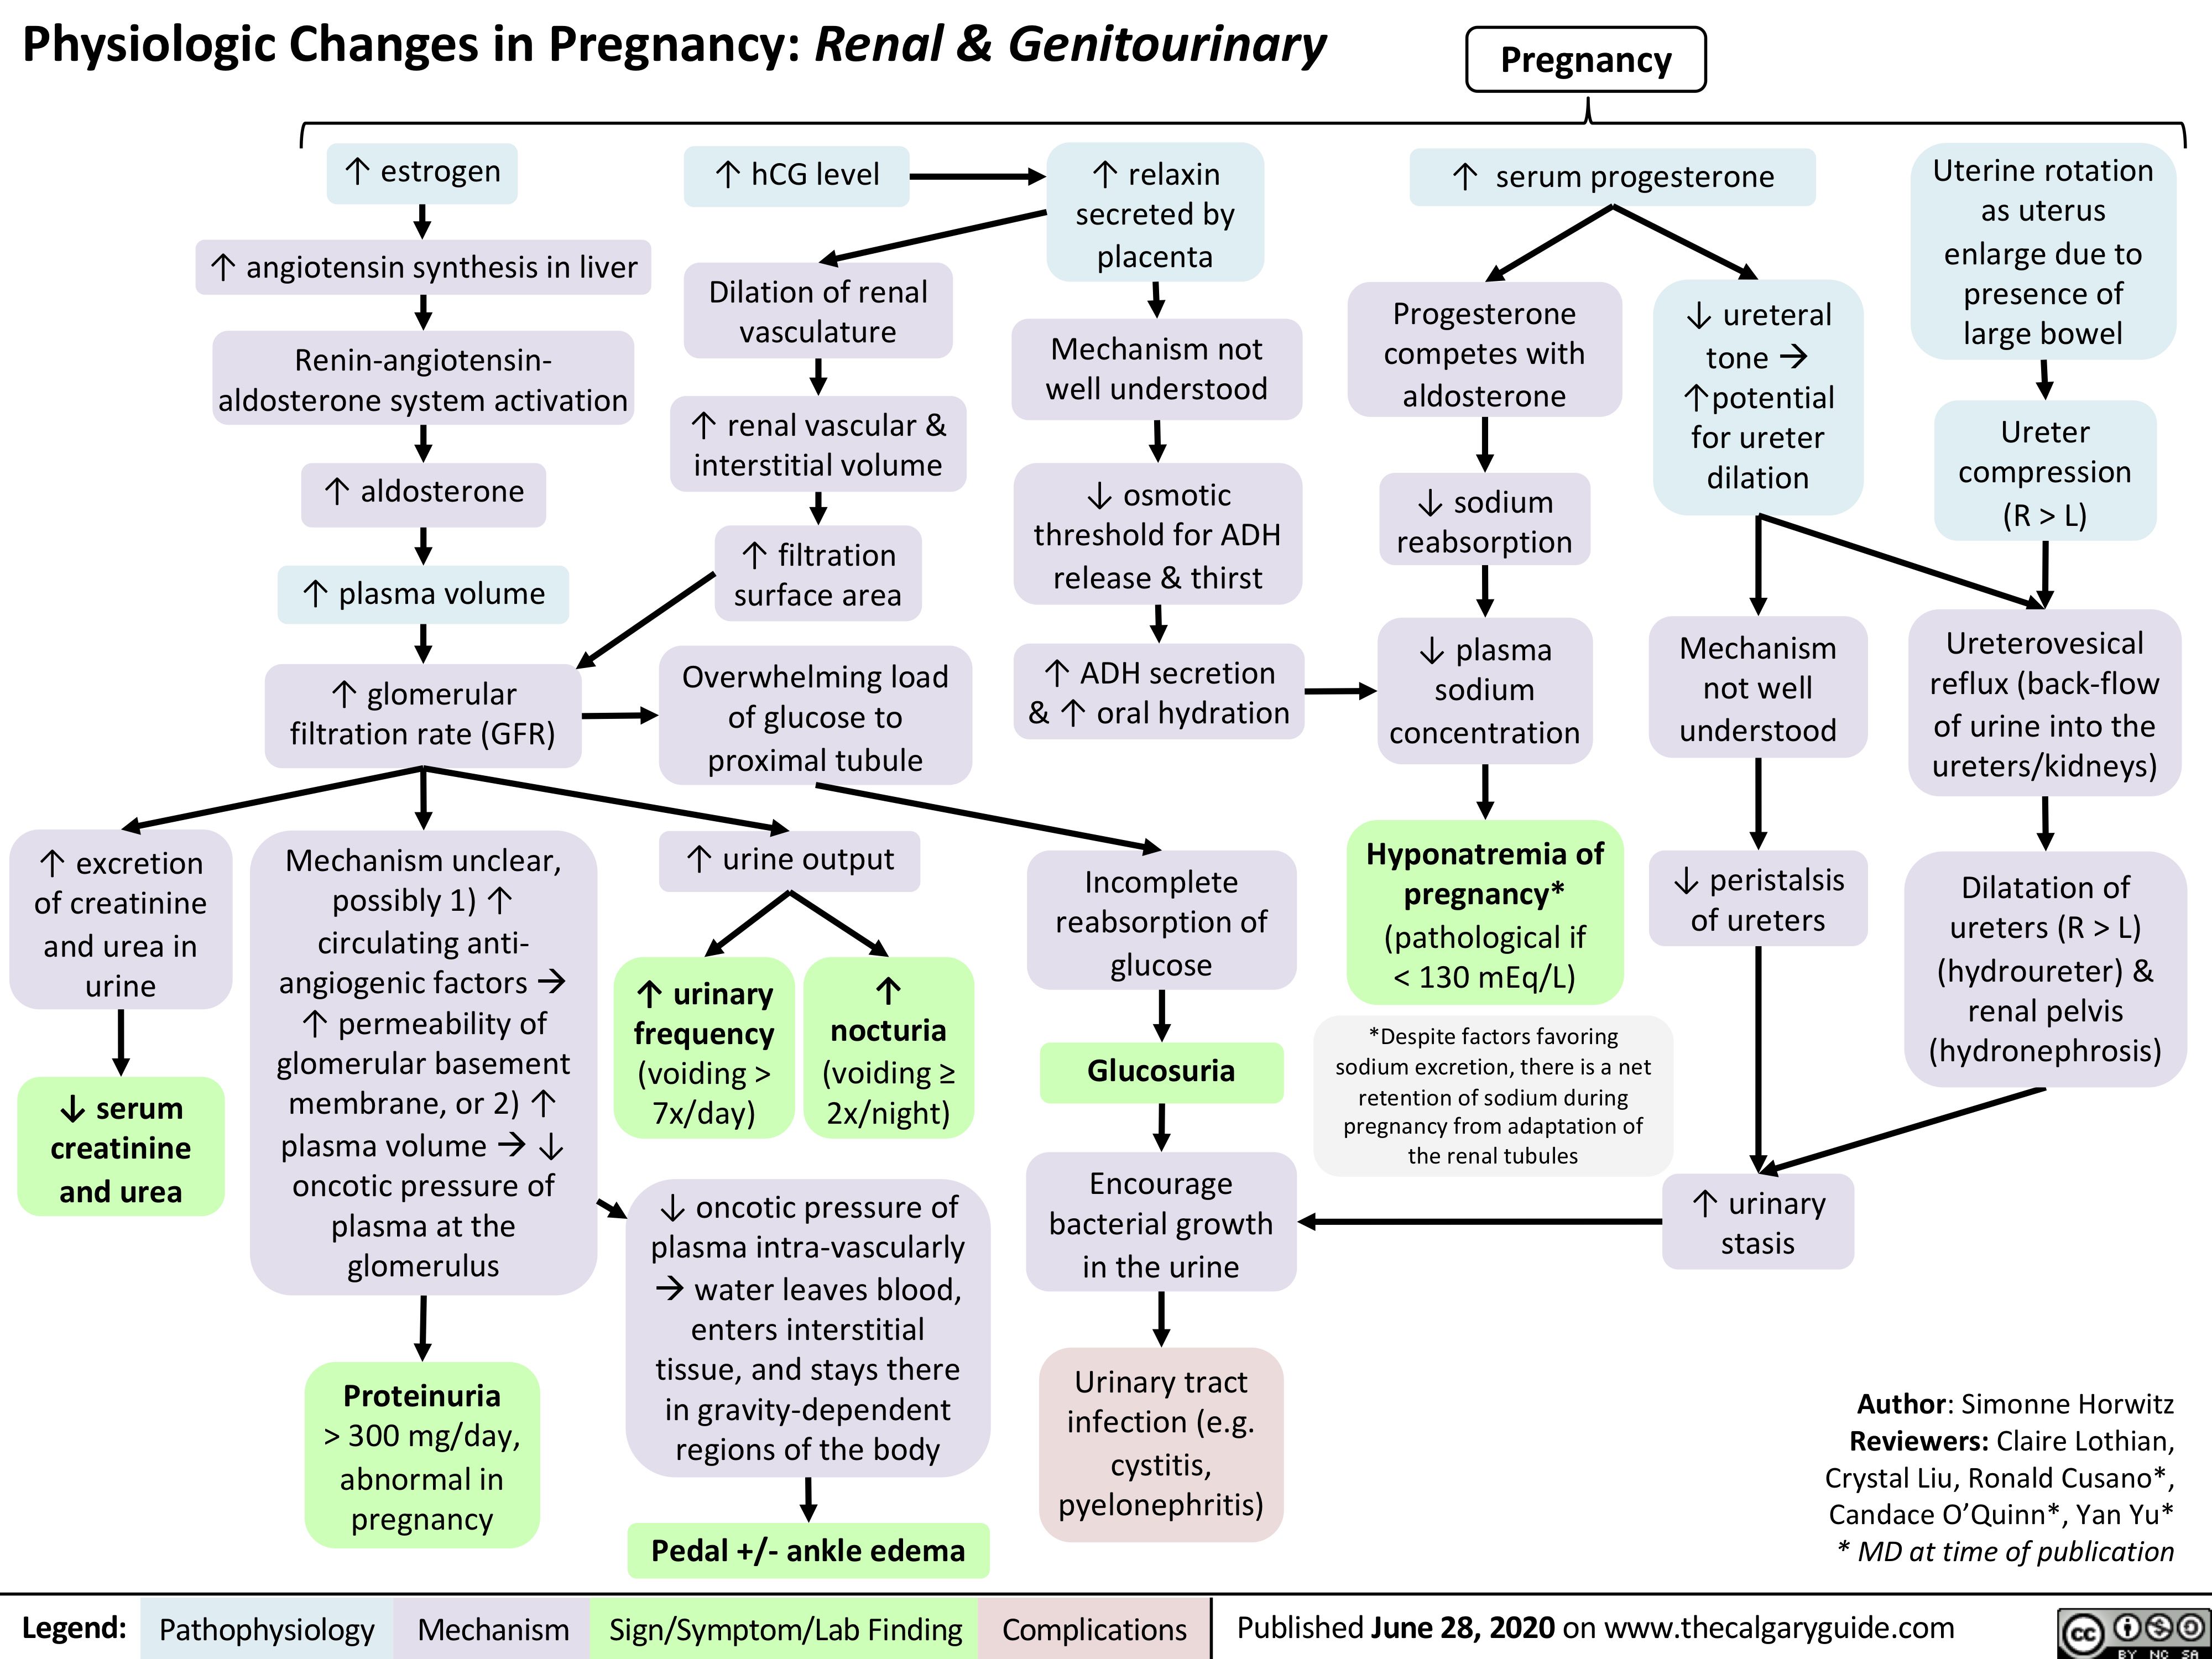 Physiologic Changes in Pregnancy: Renal & Genitourinary
Pregnancy
       ↑ estrogen
↑ angiotensin synthesis in liver
Renin-angiotensin- aldosterone system activation
↑ aldosterone ↑ plasma volume
↑ glomerular filtration rate (GFR)
Mechanism unclear, possibly 1) ↑ circulating anti- angiogenic factorsà ↑ permeability of glomerular basement membrane, or 2) ↑ plasma volumeà↓ oncotic pressure of plasma at the glomerulus
Proteinuria
> 300 mg/day, abnormal in pregnancy
↑ hCG level
Dilation of renal vasculature
↑ renal vascular & interstitial volume
↑ filtration surface area
Overwhelming load of glucose to proximal tubule
↑ urine output
↑ relaxin secreted by placenta
Mechanism not well understood
↓ osmotic threshold for ADH release & thirst
↑ ADH secretion & ↑ oral hydration
Incomplete reabsorption of glucose
Glucosuria
Encourage bacterial growth in the urine
Urinary tract infection (e.g. cystitis, pyelonephritis)
↑ serum progesterone
Uterine rotation as uterus enlarge due to presence of large bowel
Ureter compression (R > L)
Ureterovesical reflux (back-flow of urine into the ureters/kidneys)
Dilatation of ureters (R > L) (hydroureter) & renal pelvis (hydronephrosis)
          Progesterone competes with aldosterone
↓ sodium reabsorption
↓ plasma sodium concentration
Hyponatremia of pregnancy* (pathological if < 130 mEq/L)
*Despite factors favoring sodium excretion, there is a net retention of sodium during pregnancy from adaptation of the renal tubules
↑ urinary stasis
                                           ↑ excretion of creatinine and urea in urine
↓ serum creatinine and urea
↓ ureteral toneà ↑potential for ureter dilation
Mechanism not well understood
↓ peristalsis of ureters
        ↑ urinary frequency (voiding > 7x/day)
↑ nocturia (voiding ≥ 2x/night)
          ↓ oncotic pressure of plasma intra-vascularly àwater leaves blood, enters interstitial tissue, and stays there in gravity-dependent regions of the body
Pedal +/- ankle edema
Author: Simonne Horwitz Reviewers: Claire Lothian, Crystal Liu, Ronald Cusano*, Candace O’Quinn*, Yan Yu* * MD at time of publication
         Legend:
 Pathophysiology
 Mechanism
Sign/Symptom/Lab Finding
  Complications
Published June 28, 2020 on www.thecalgaryguide.com
   